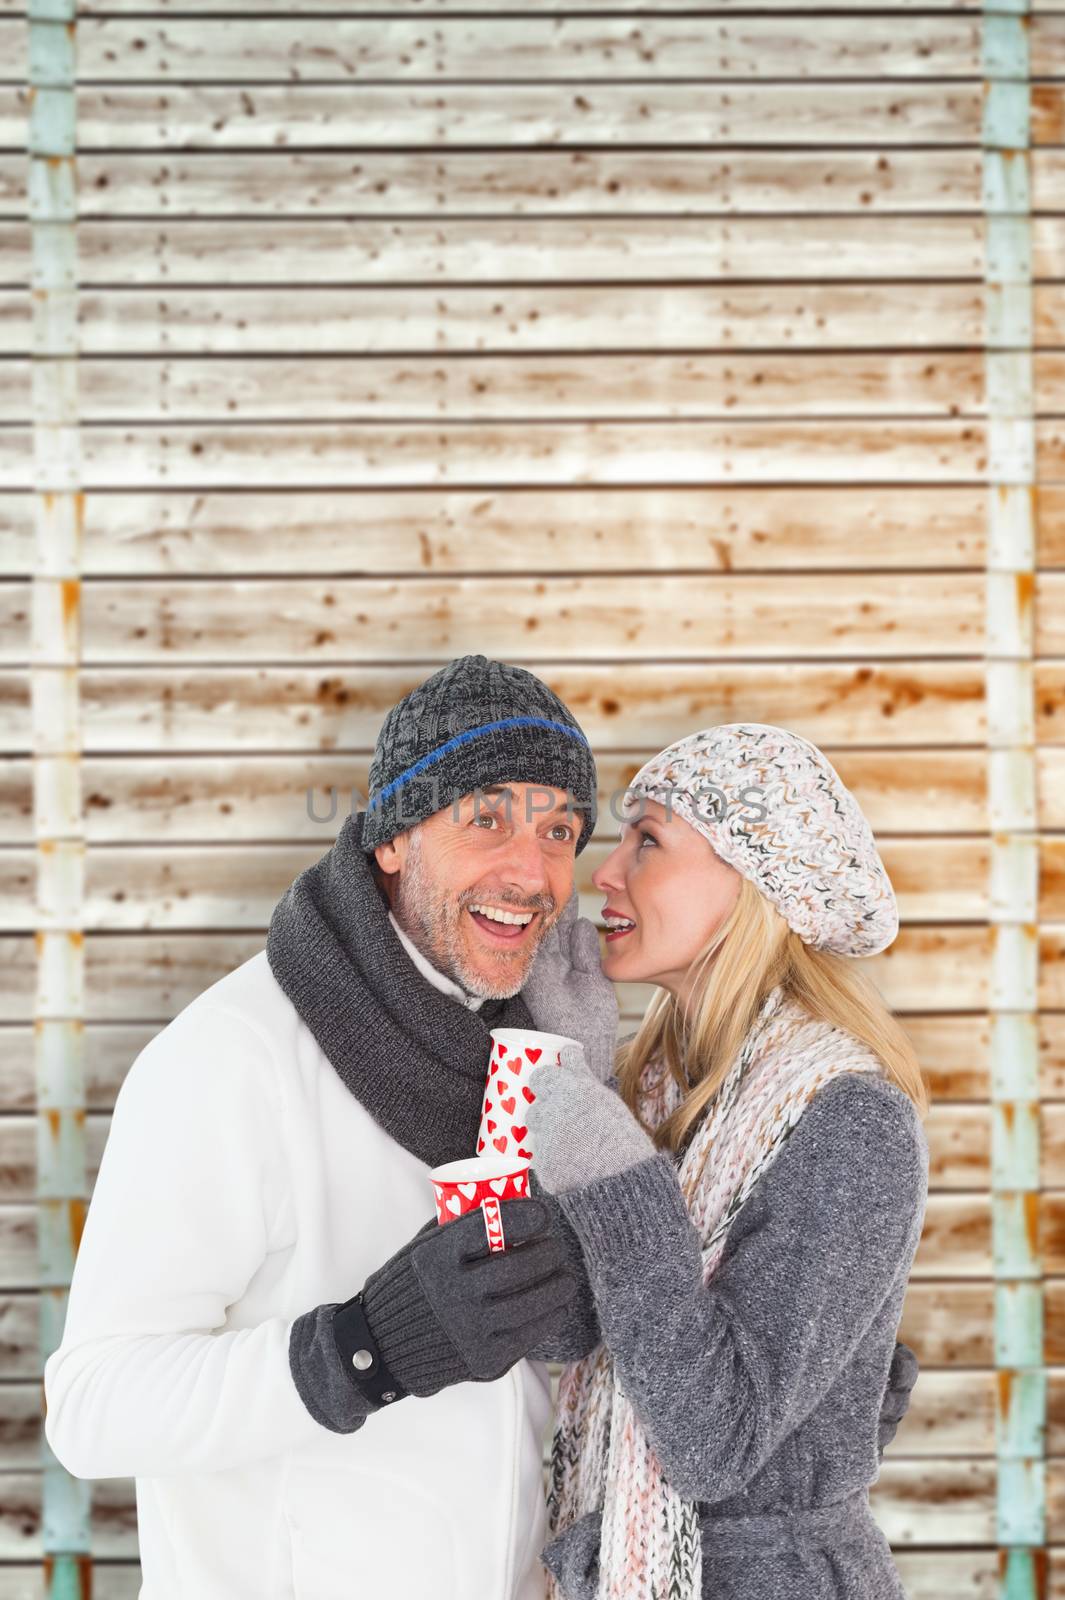 Composite image of happy couple in winter fashion holding mugs by Wavebreakmedia